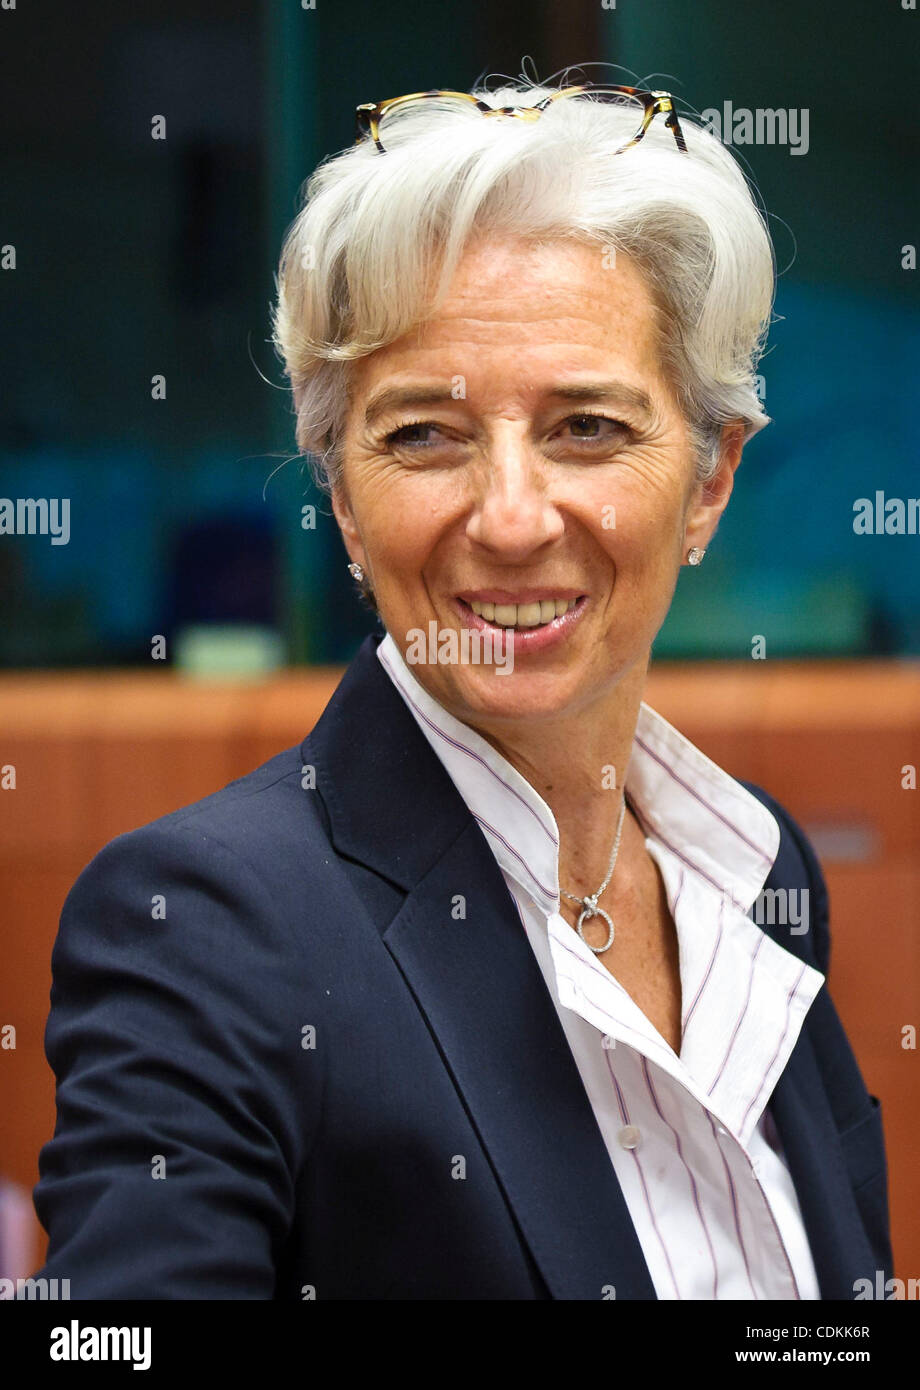 Mar. 21, 2011 - Brussels, BXL, Belgium - French Finance Minister Christine Lagarde  before a ministerial meeting on European Stability Mecanism at EU headquarters in Brussels  in  Brussels, Belgium on 2011-03-21 The extraordinary meeting of finance ministers of the eurozone will finalize discussions Stock Photo